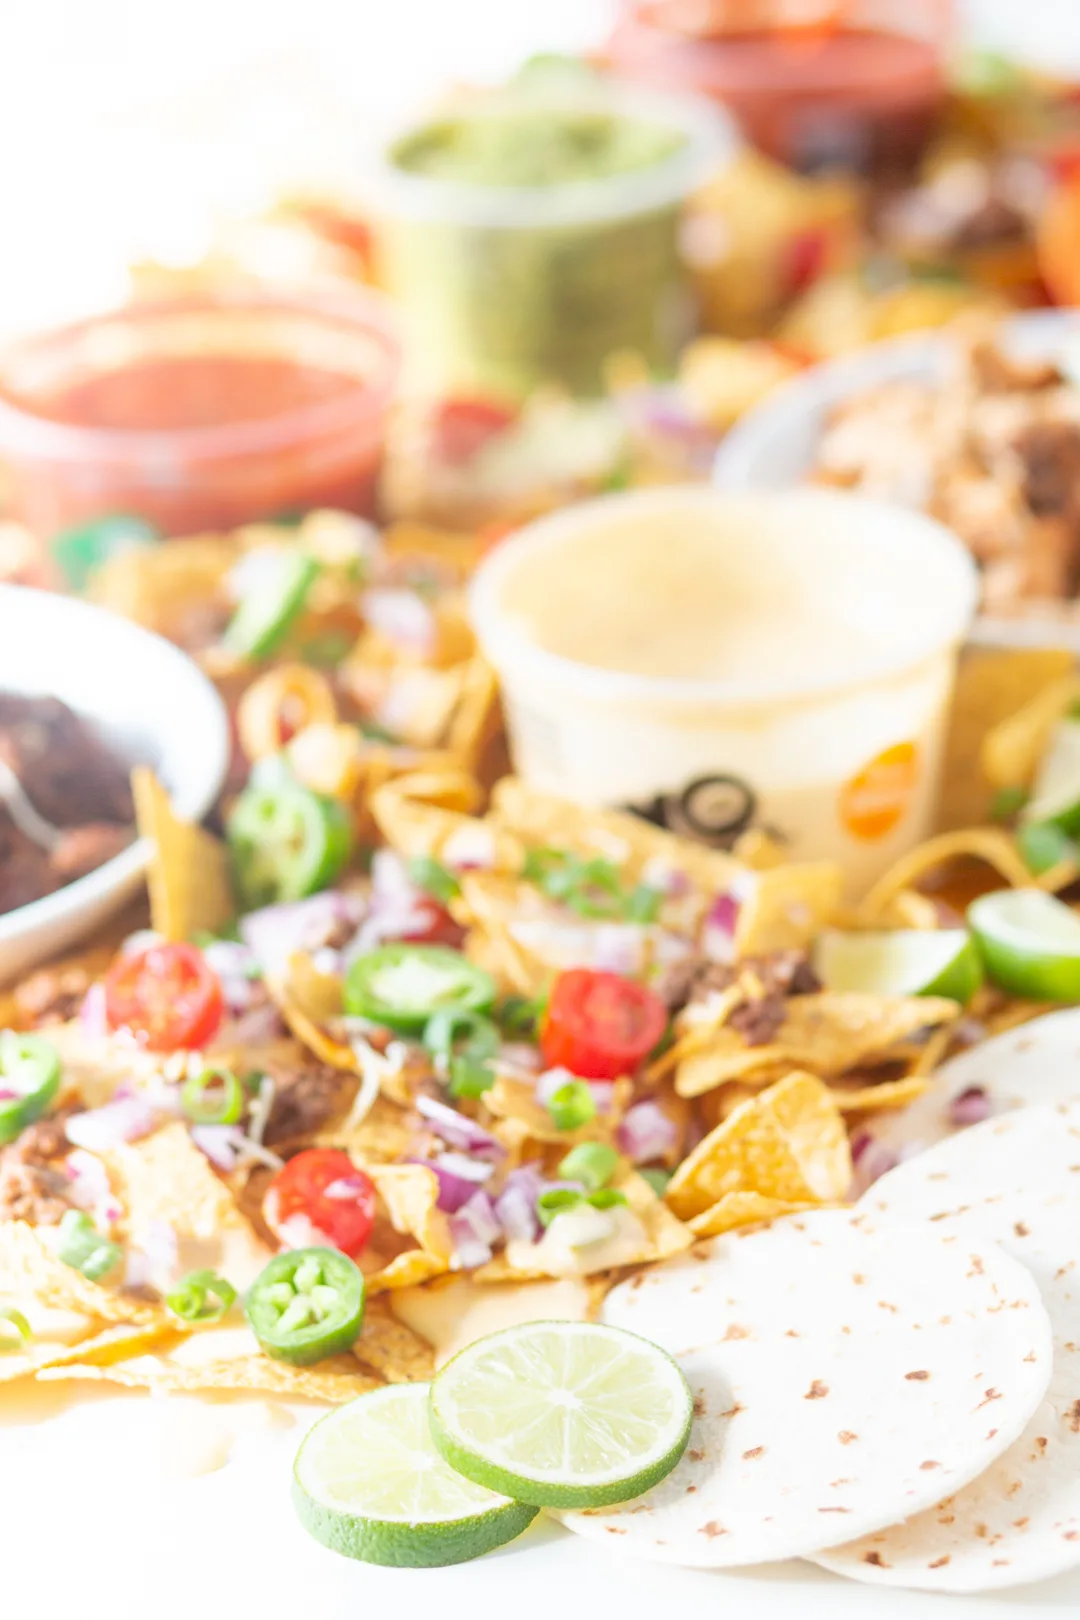 up close view of table nachos. tortilla chips loaded with fresh toppings. sliced grape tomatoes, jalapeño slices, scallions, cheese.